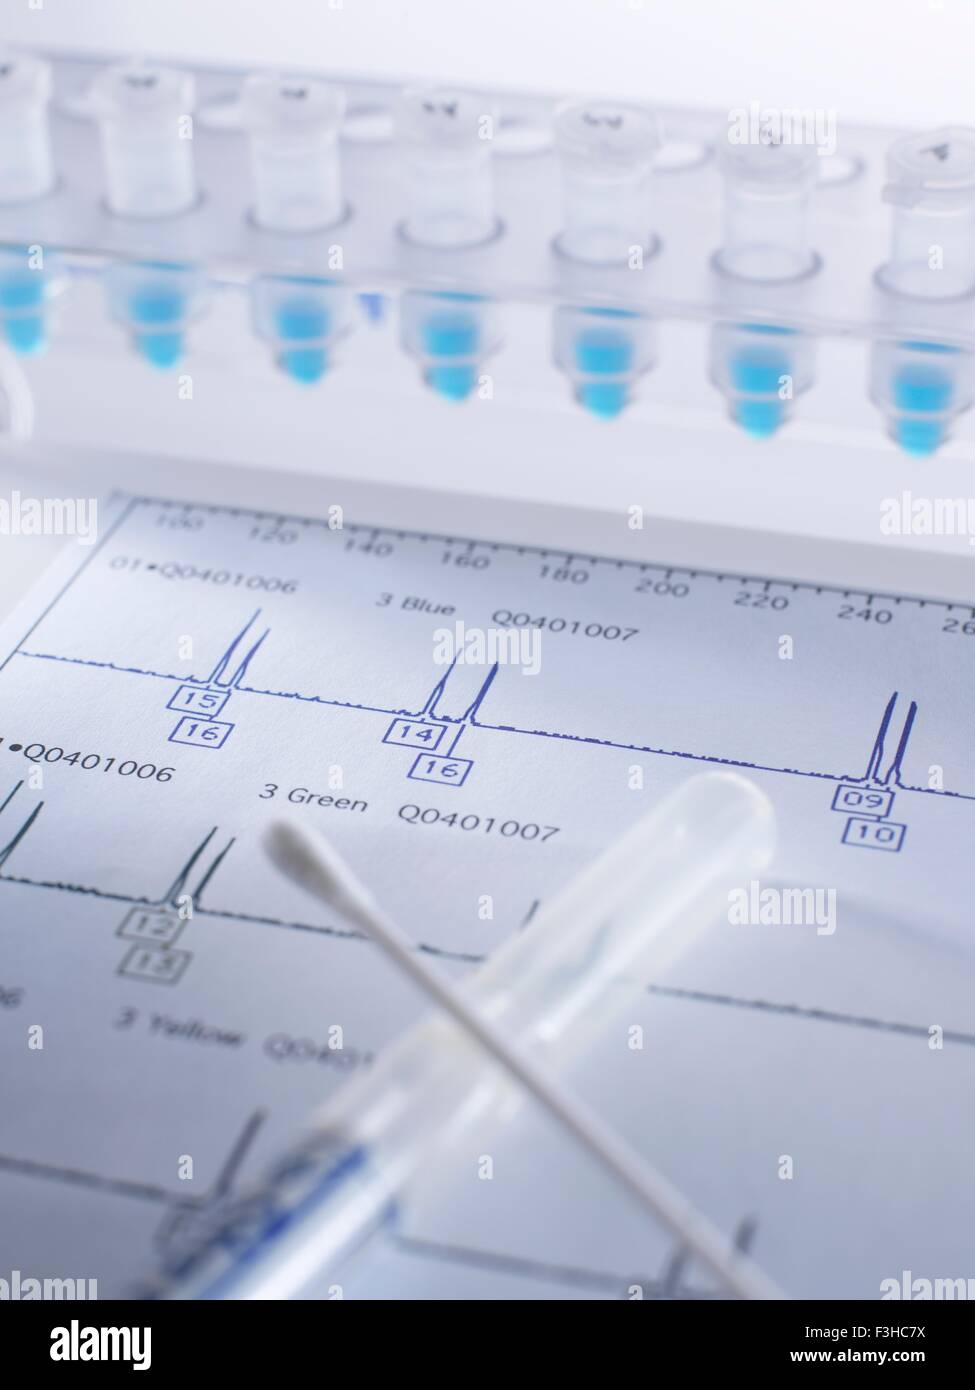 Samples and swab containing DNA sample on genetic testing results Stock Photo